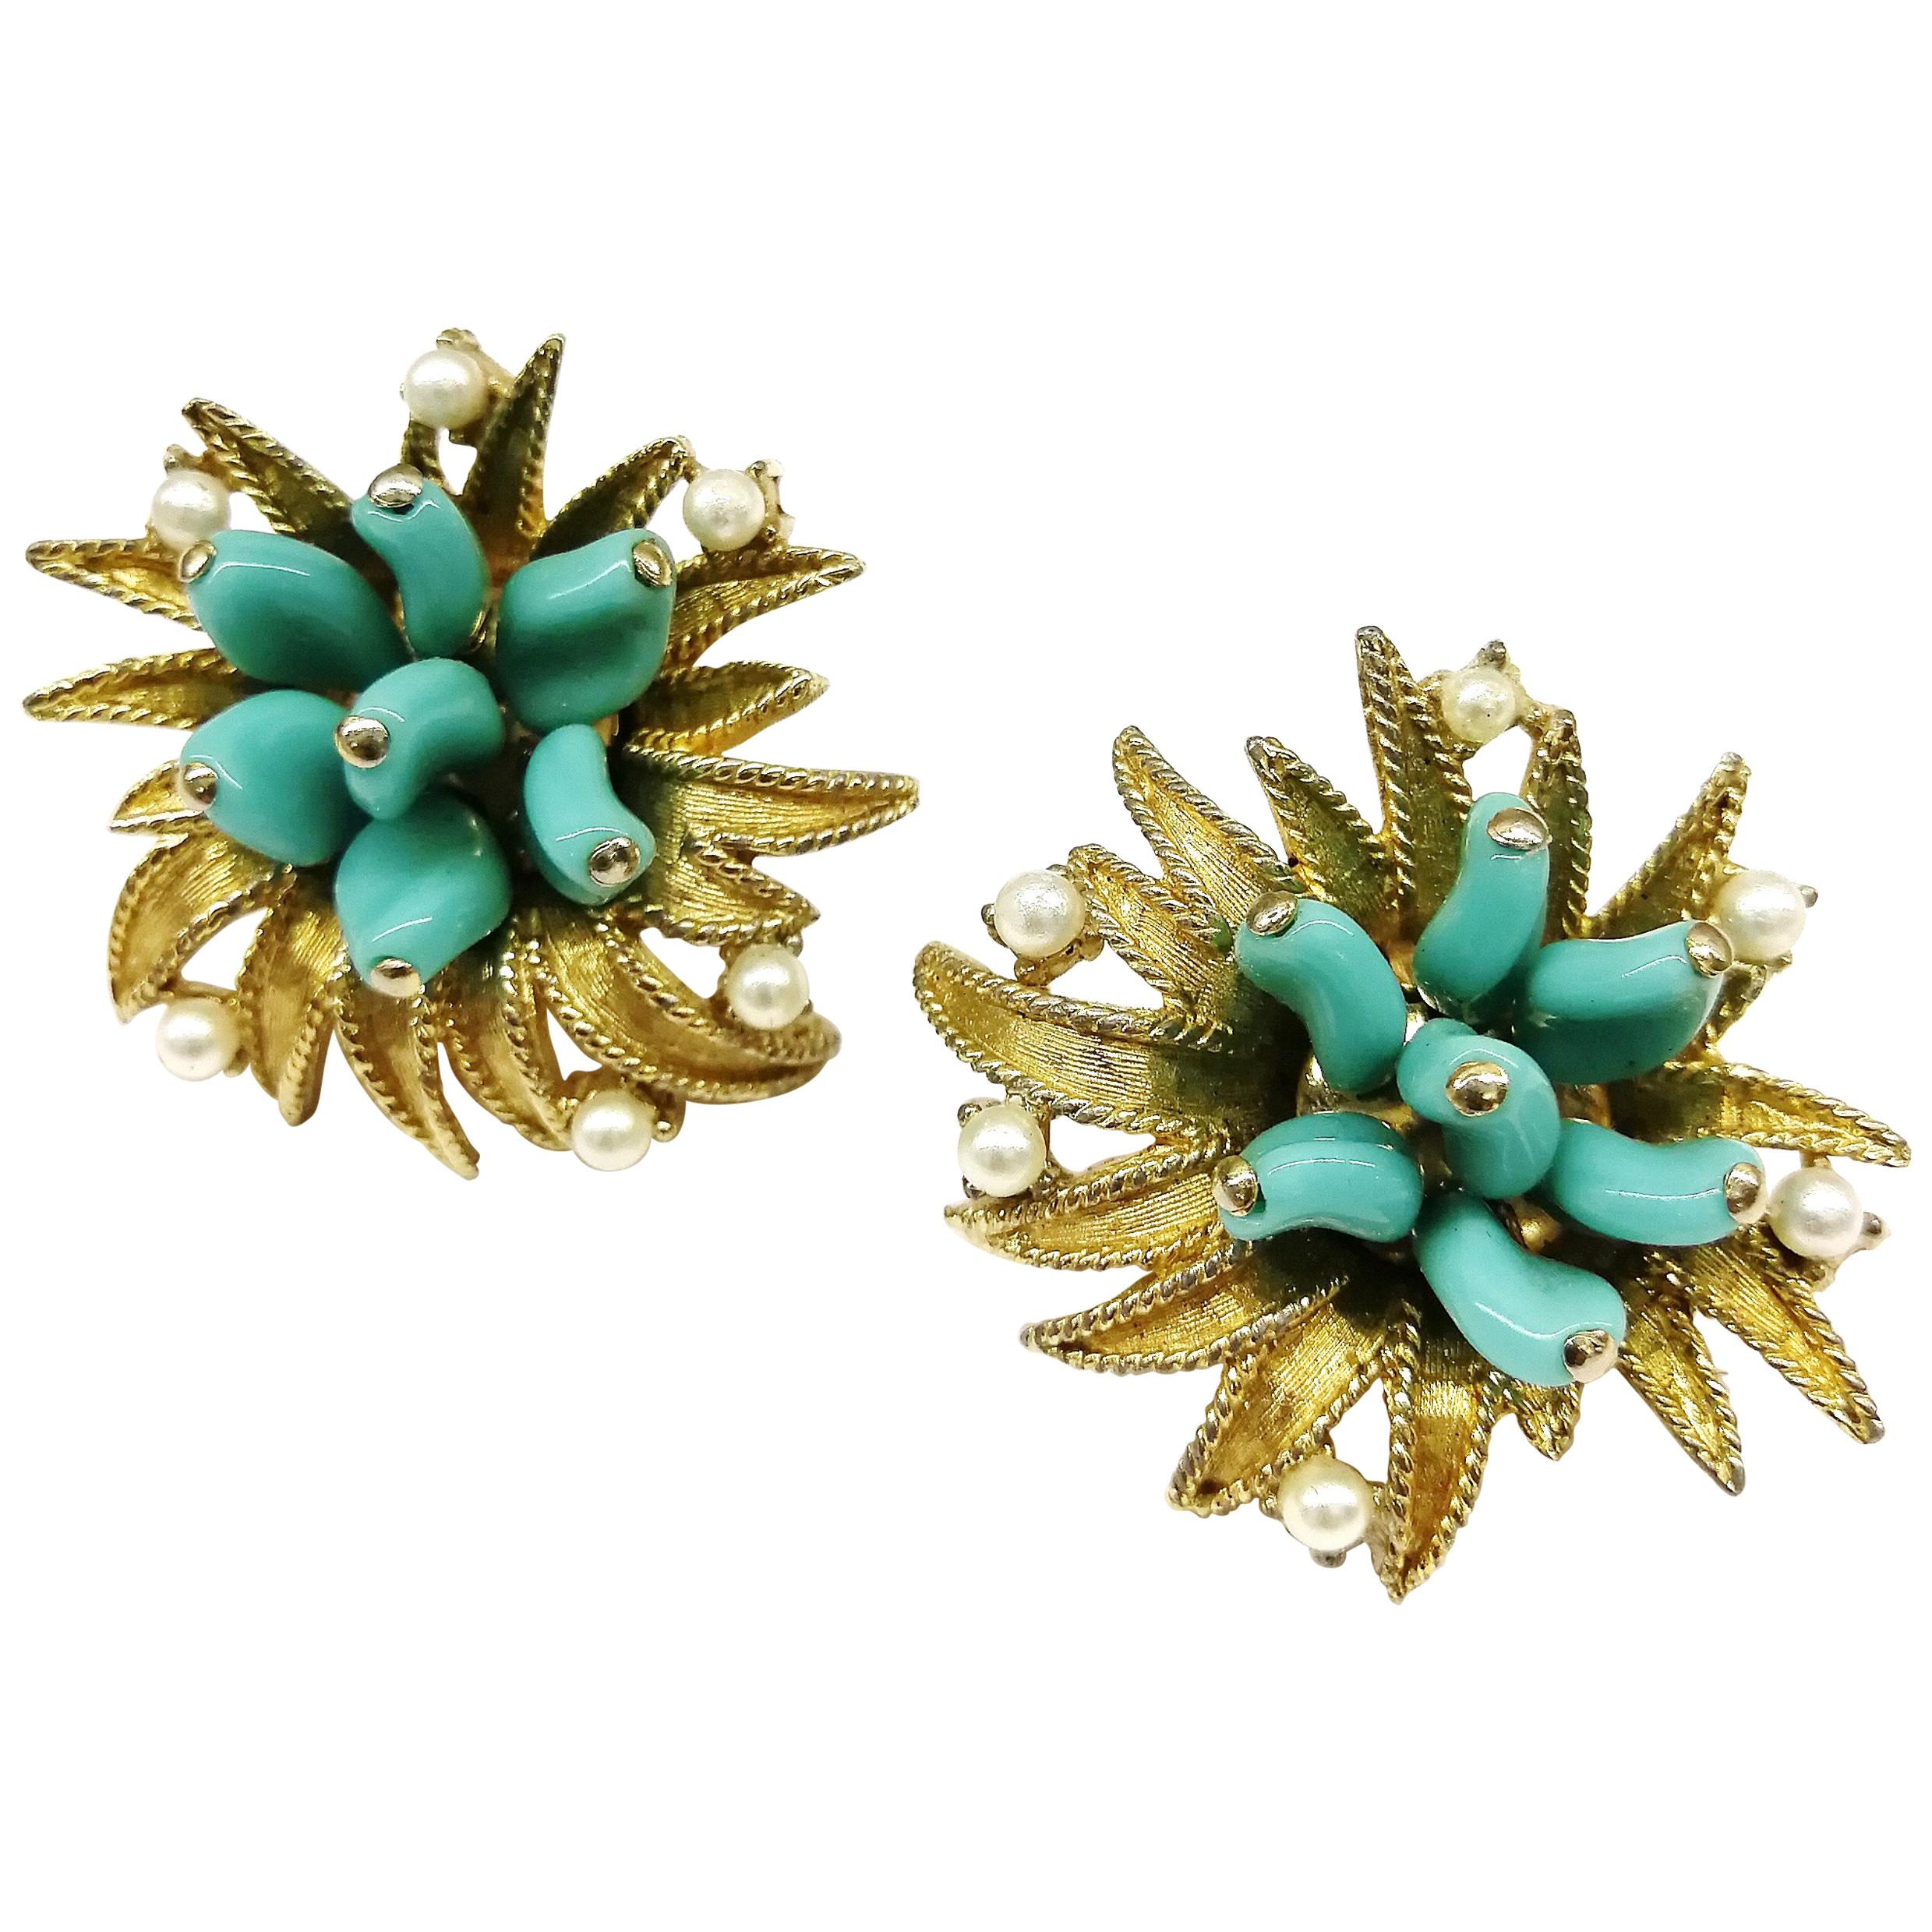 Turquoise glass, paste pearls  and gilt metal earrings, Marcel Boucher, 1960s